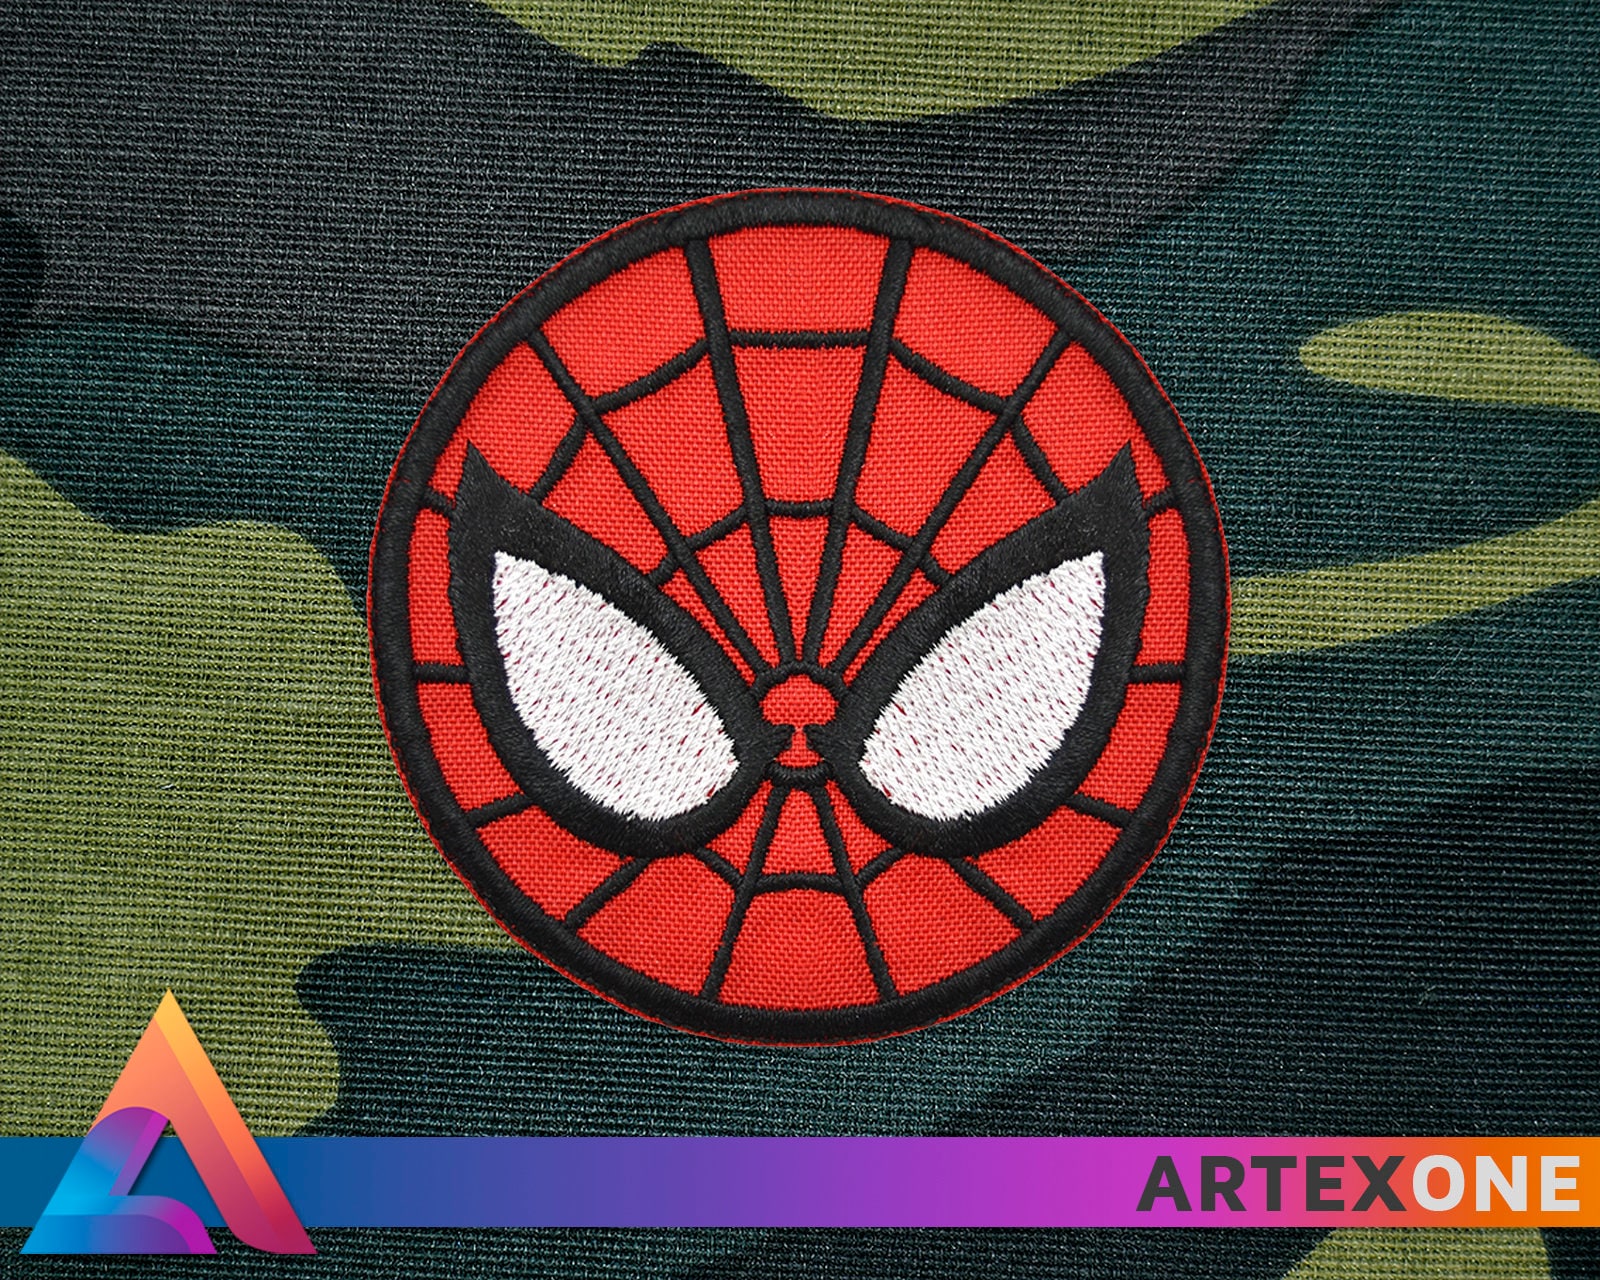 Spiderman Classic Wall Crawl Patch